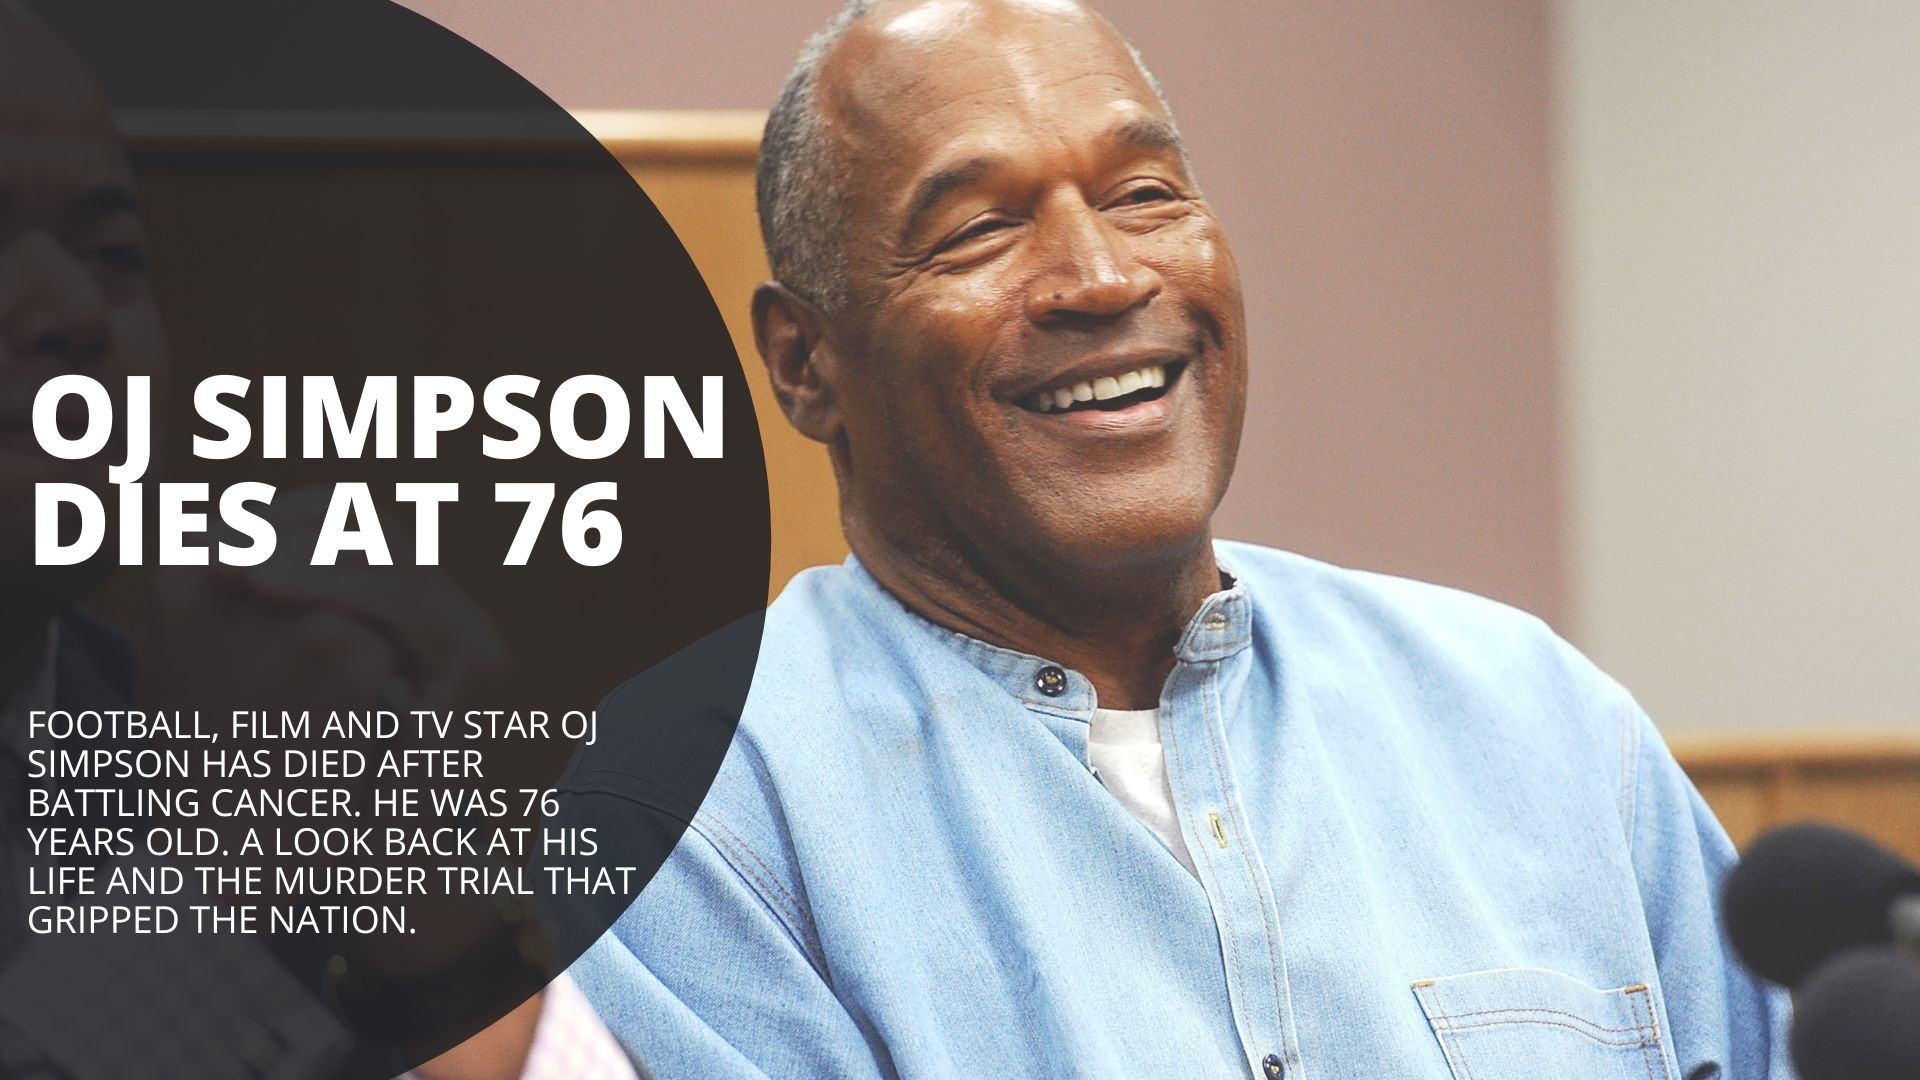 Football, film and TV star OJ Simpson has died after battling cancer. He was 76 years old. A look back at his life and the murder trial that gripped the nation.